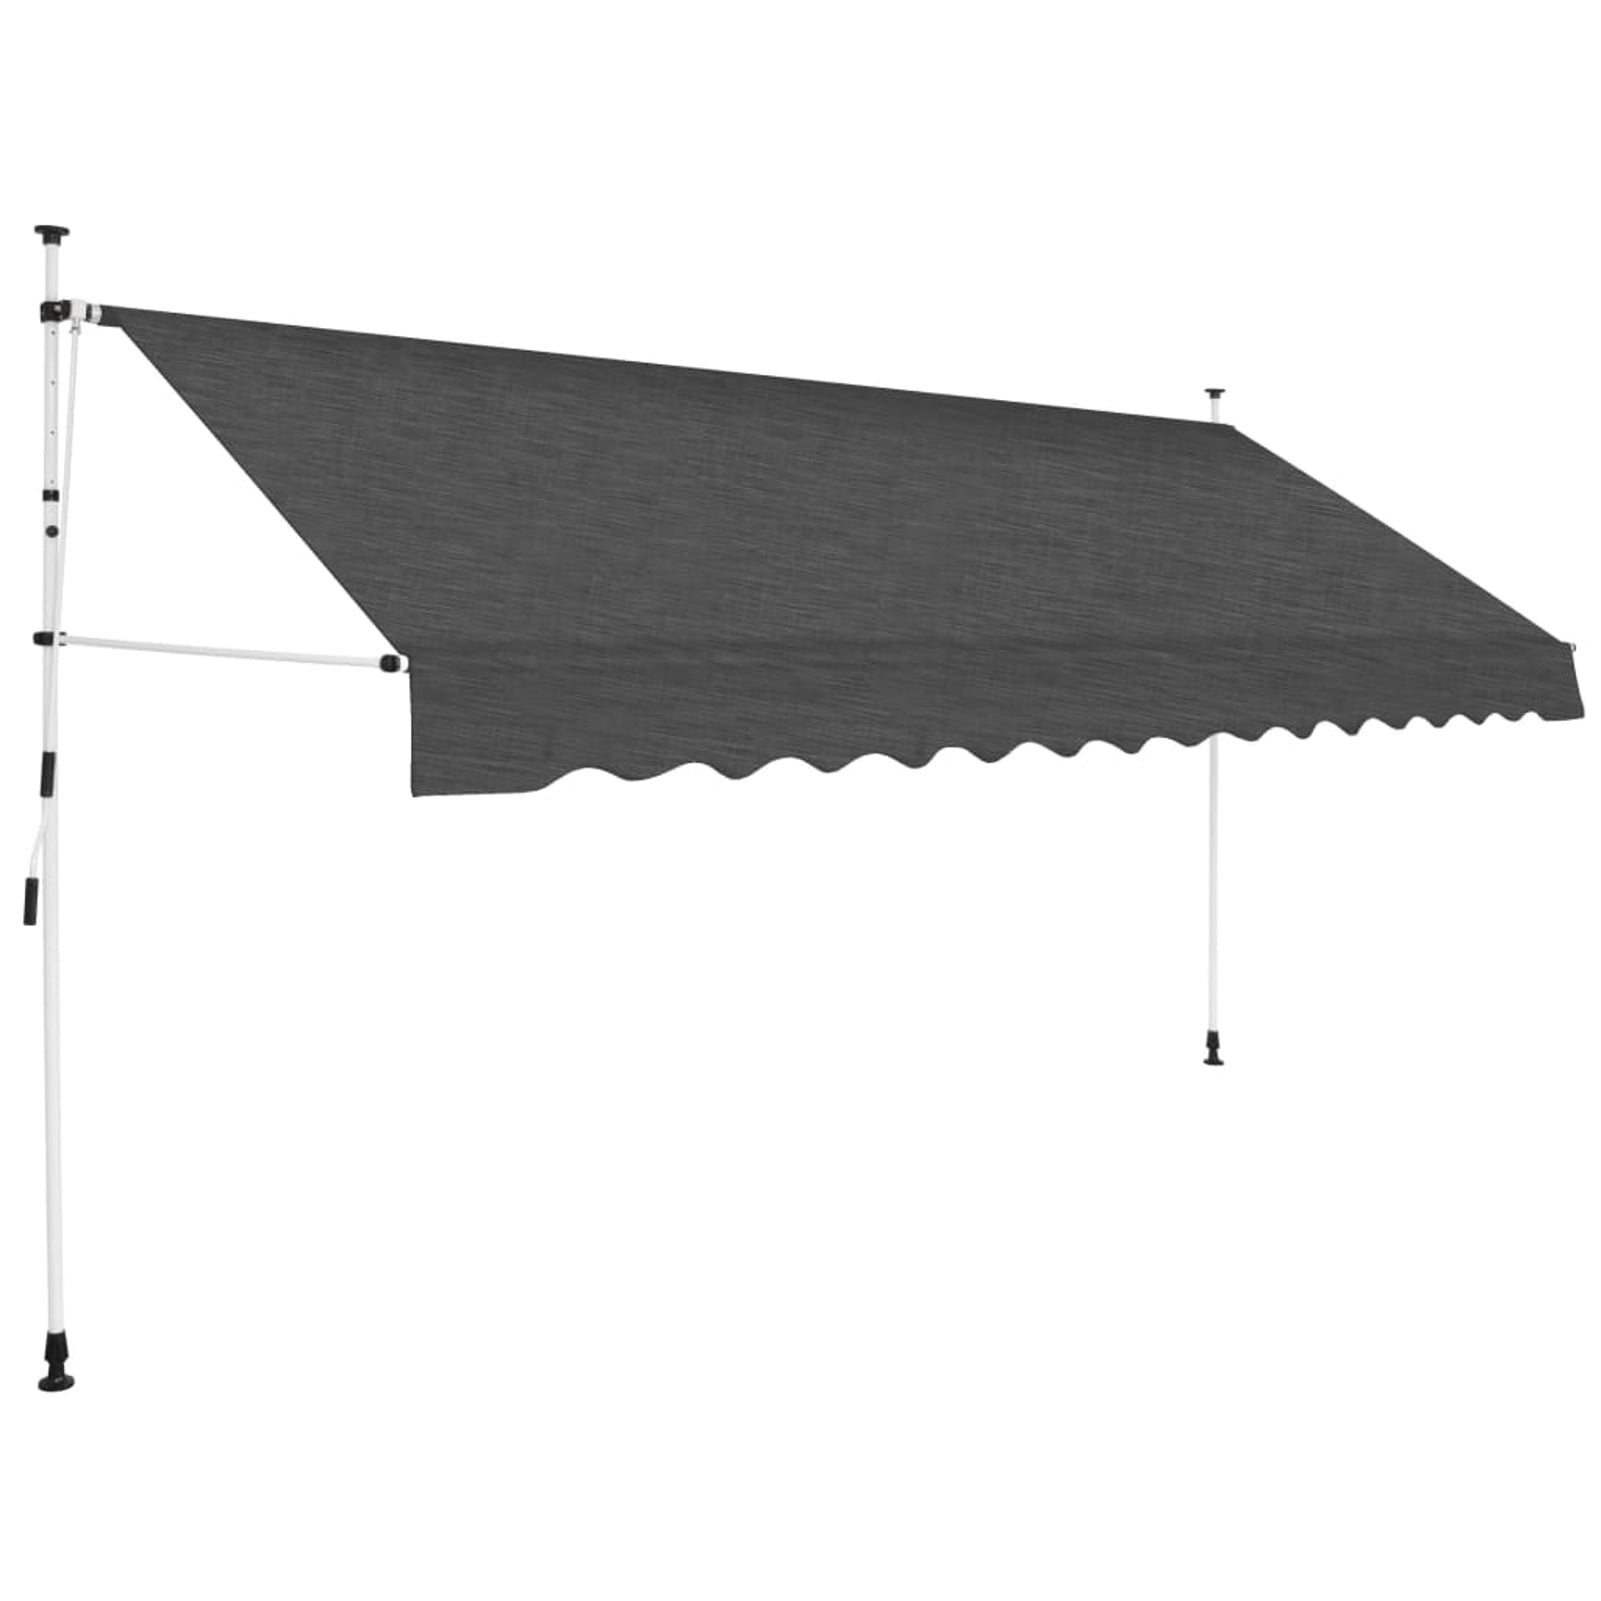 Details about   13x8ft Retractable Awning Aluminum Patio Sun Shade Awning Cover Protector Shade 